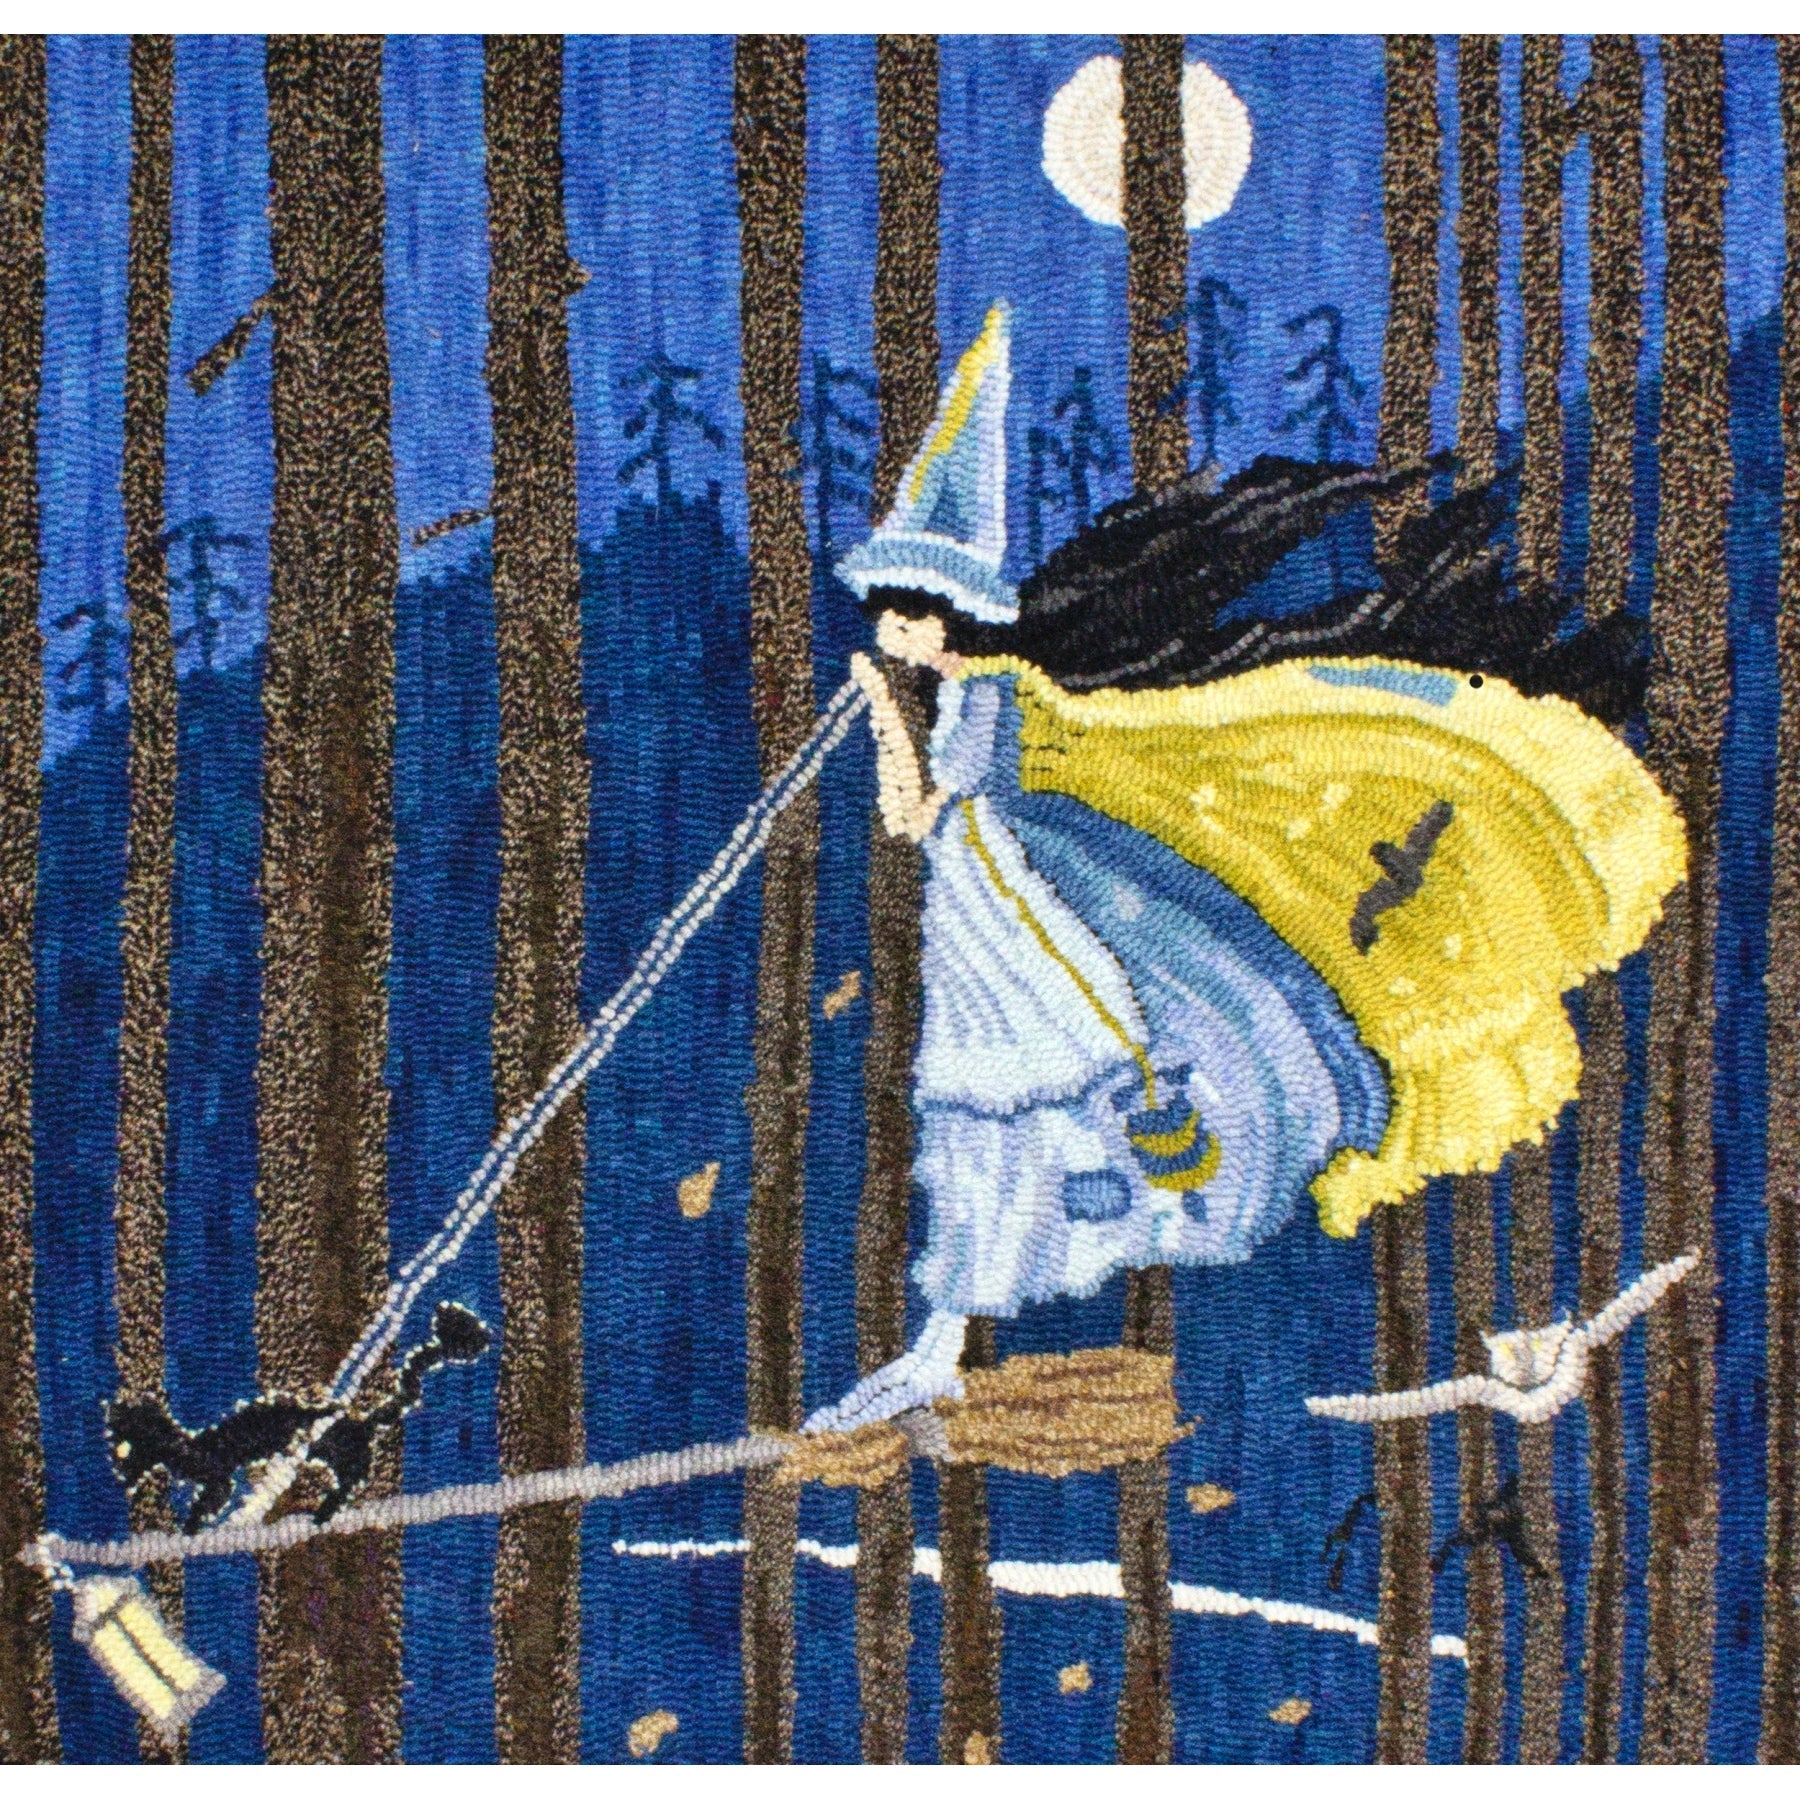 The Witch on her broom, ill. Ida Rentoul Outhwaite, 1921, rug hooked by Karen Krepps